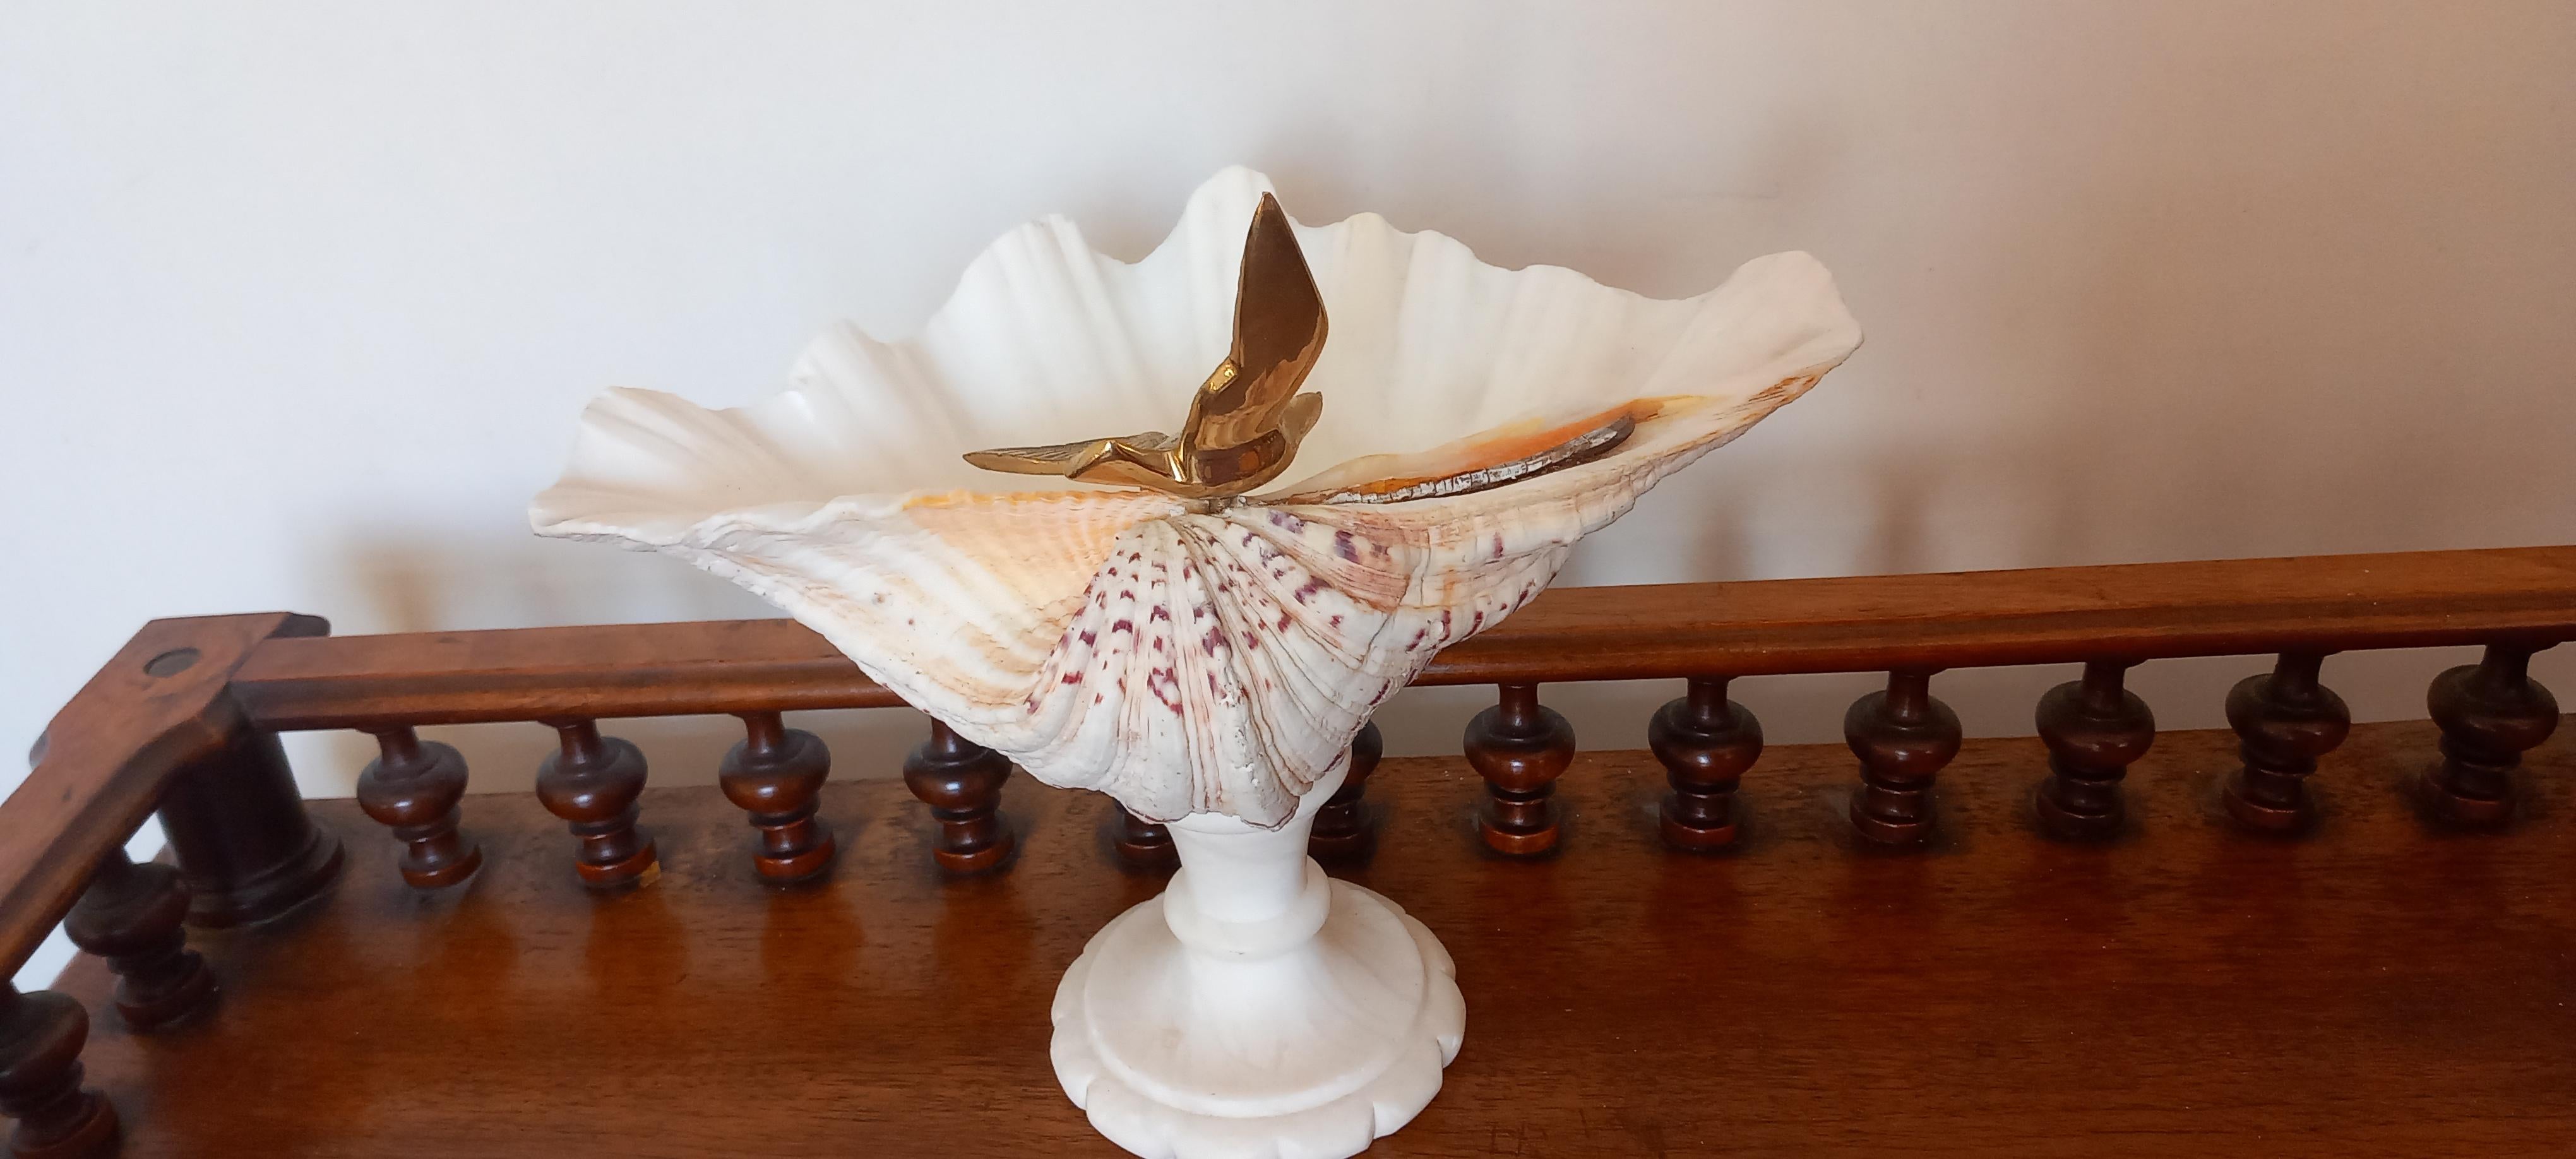 Beautiful and elegant shell on pure white marble pedestal
  It has an ornament of a bronze bird, but you can remove it if you don't like it and leave the shell alone.
Its condition is excellent, both the shell and the pedestal.
It is ideal as a gift